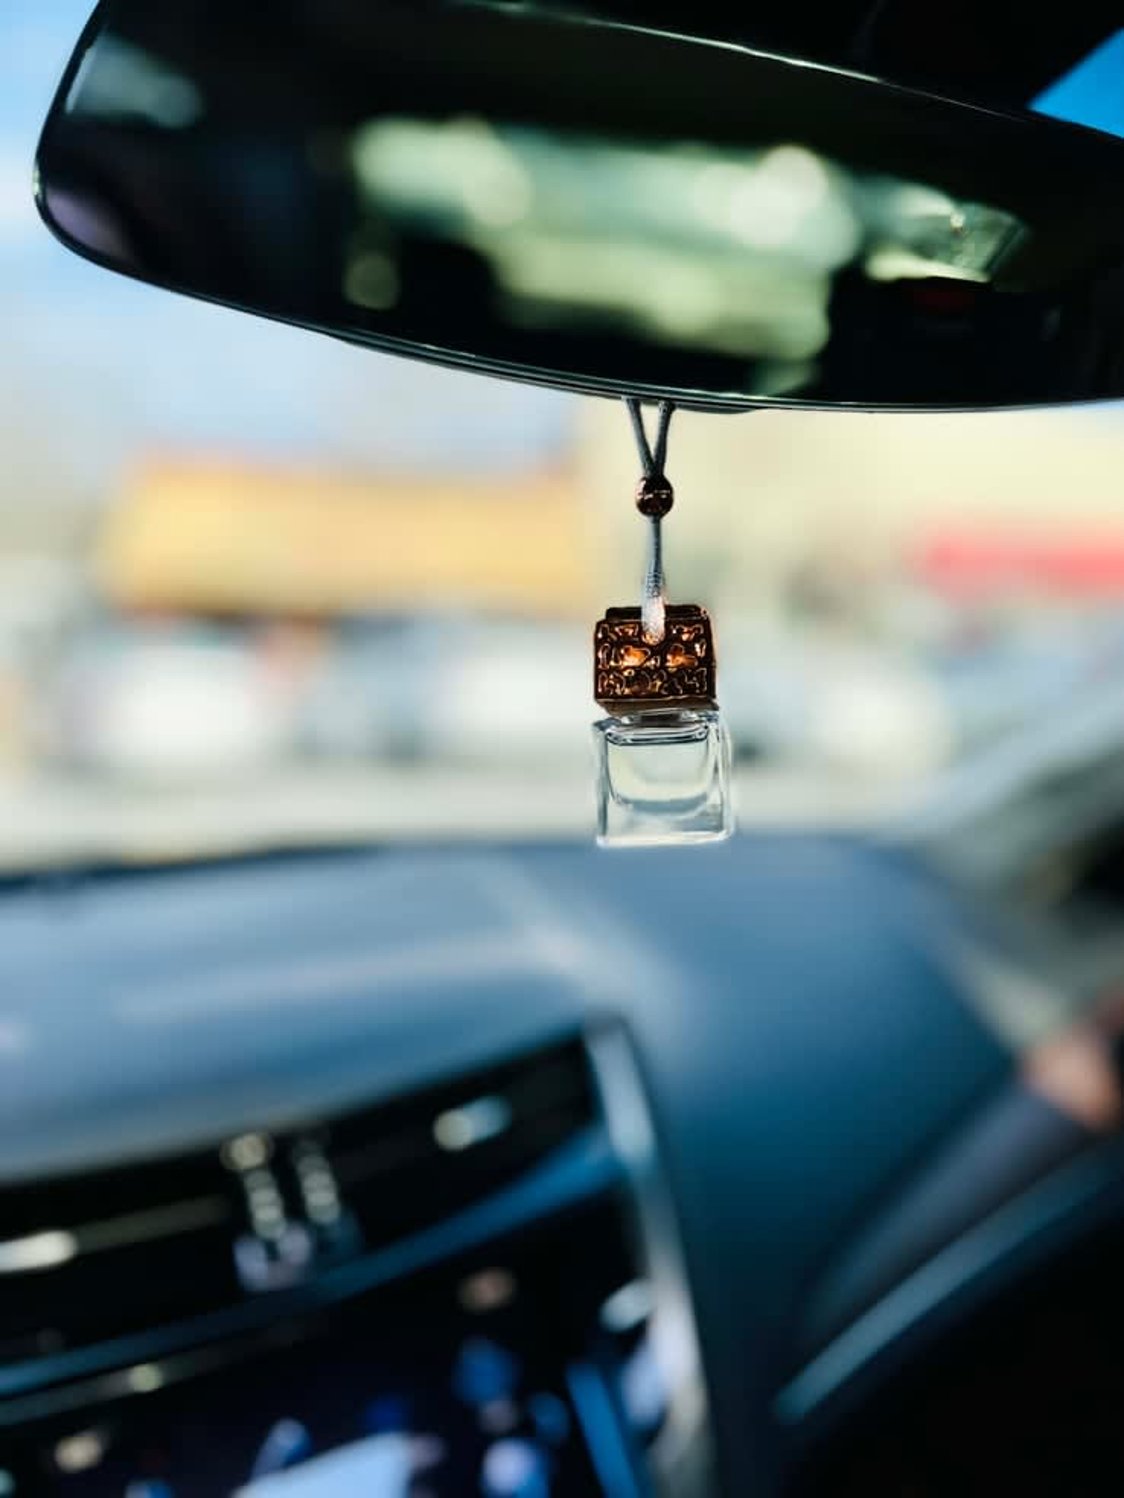 Transform your driving experience with our Car Refreshers, as they dance on your rearview mirror, releasing the invigorating scents of essential oils and luxurious fragrances.